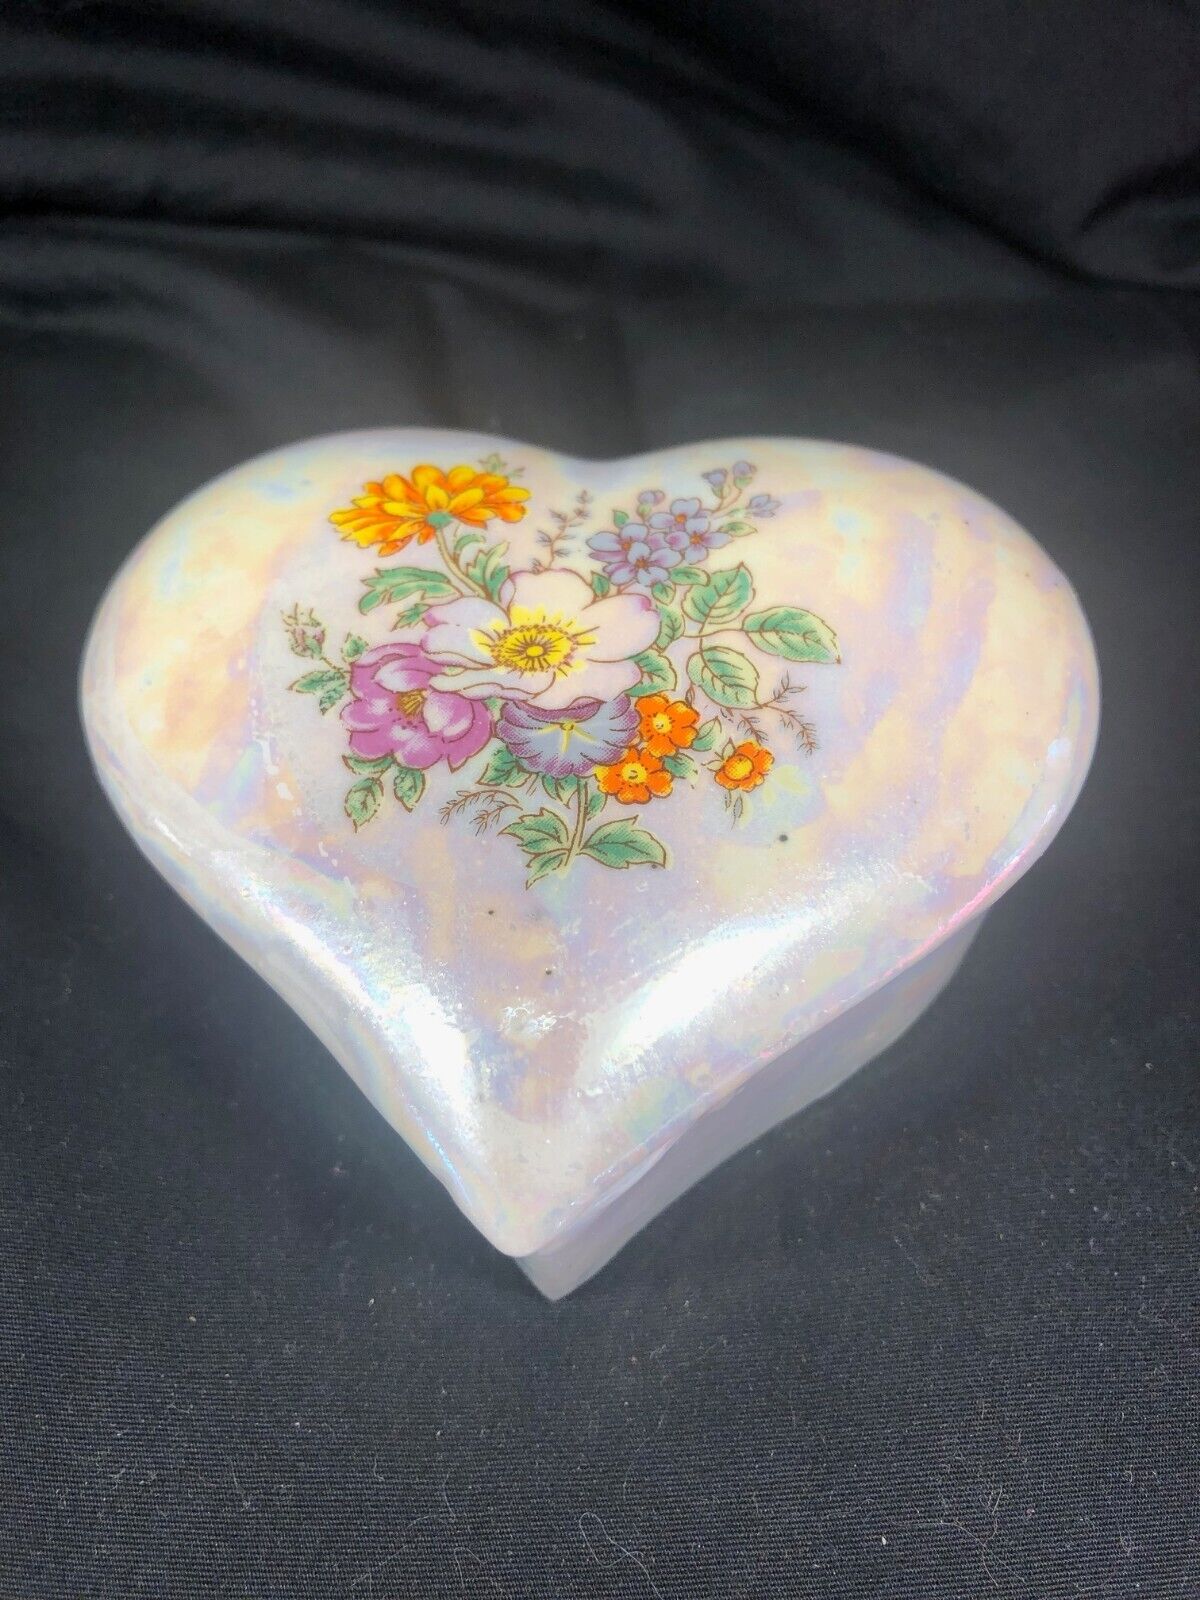 Heart Shaped Porcelain Trinket Box w/ Flowers  white in color, iridescent finish